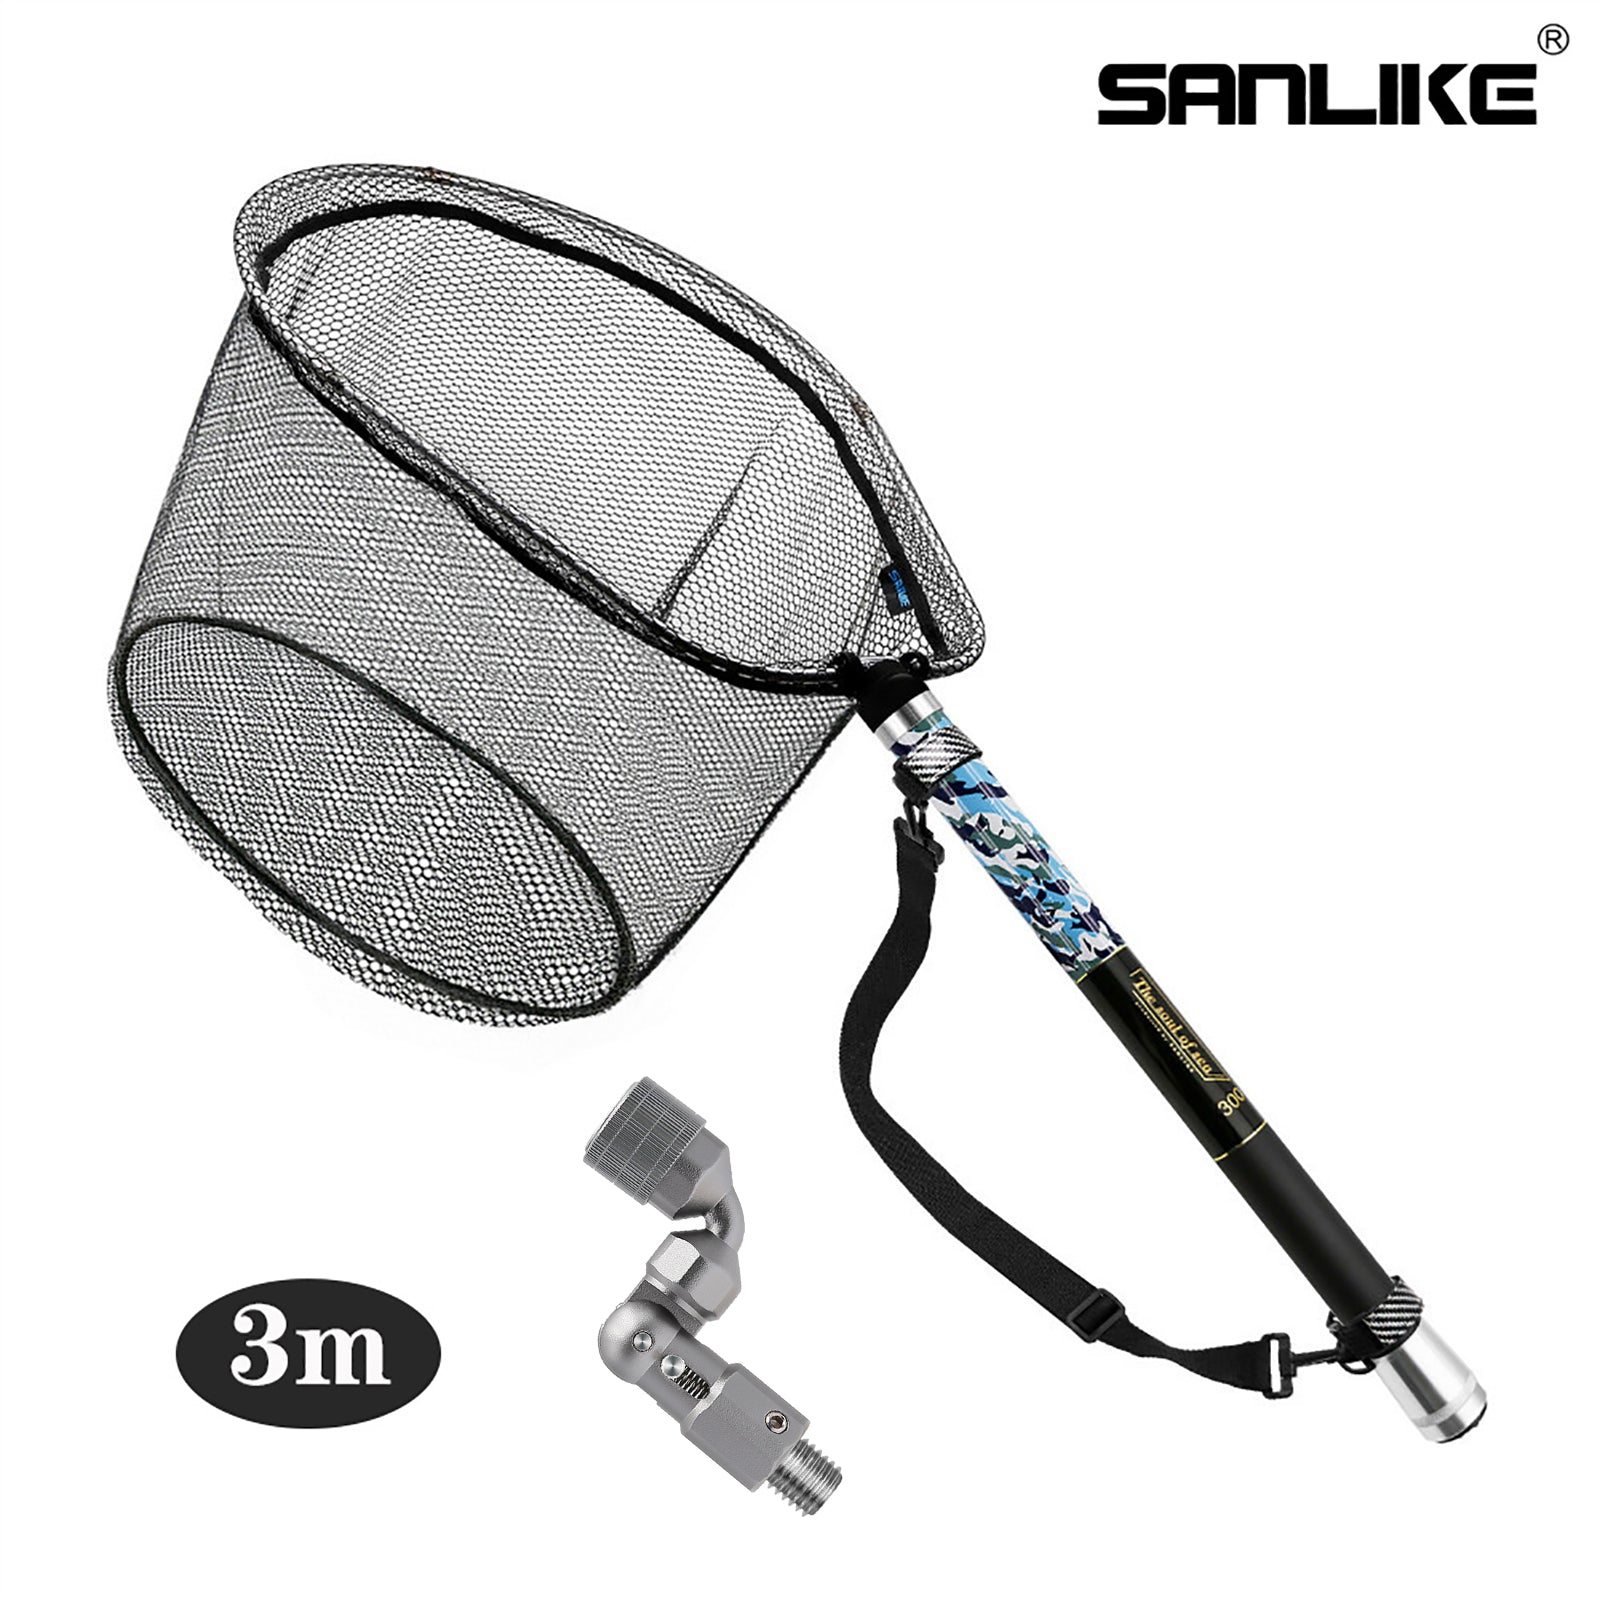 SANLIKE 3m Fishing Net With Folding joint Telescoping Carbon Pole